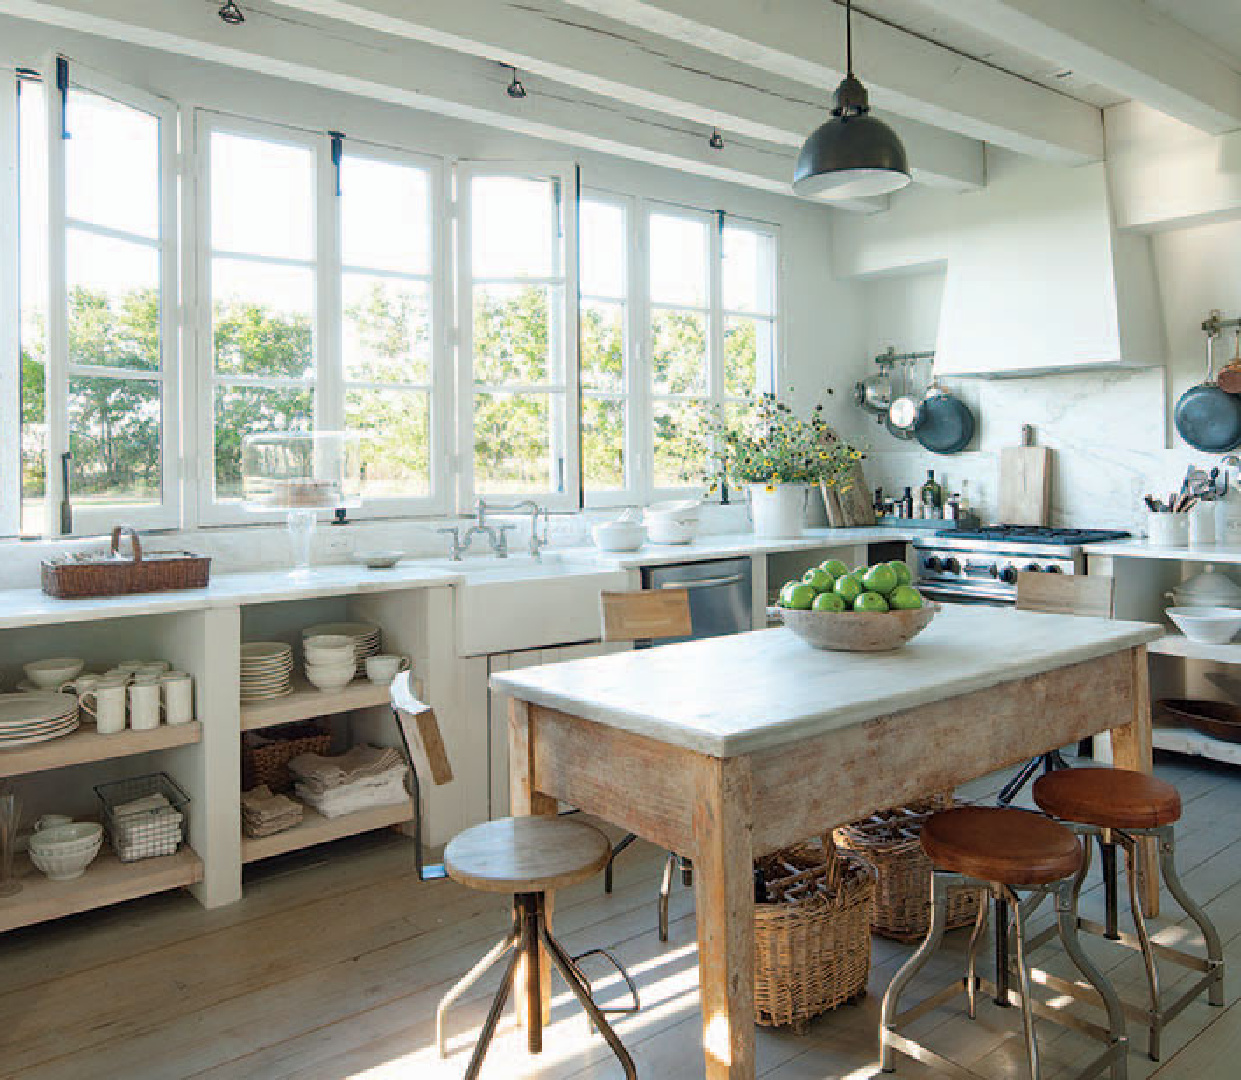 Modern French farmhouse kitchen in home near Round Top, TX, designed by Kirby Mears for Eleanor Cummings, interior designer.